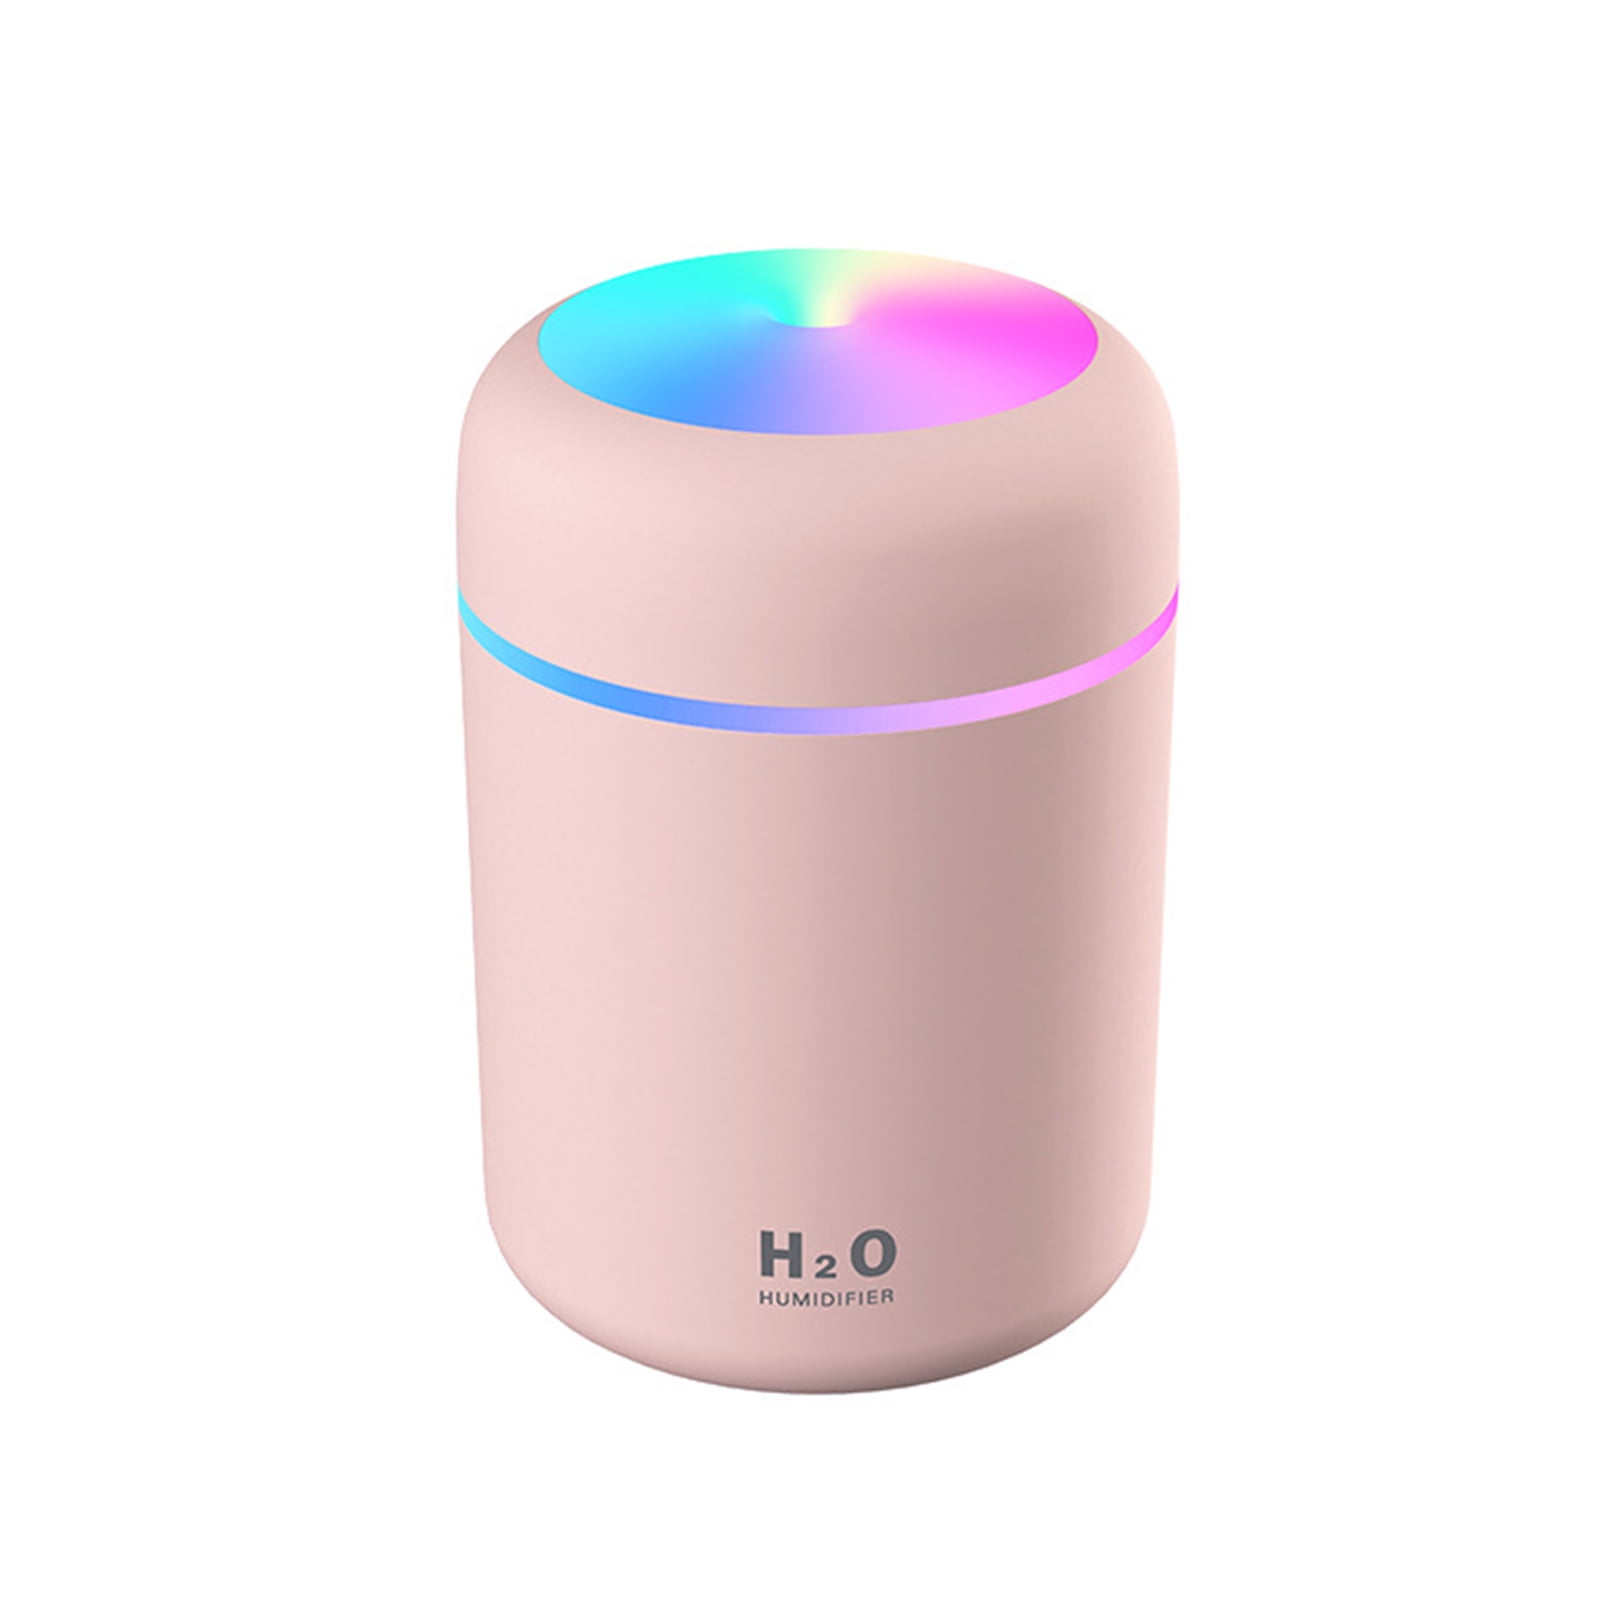 Details about   New usb Aromatherapy diffuse fragrance humidifier essential oil set show original title 